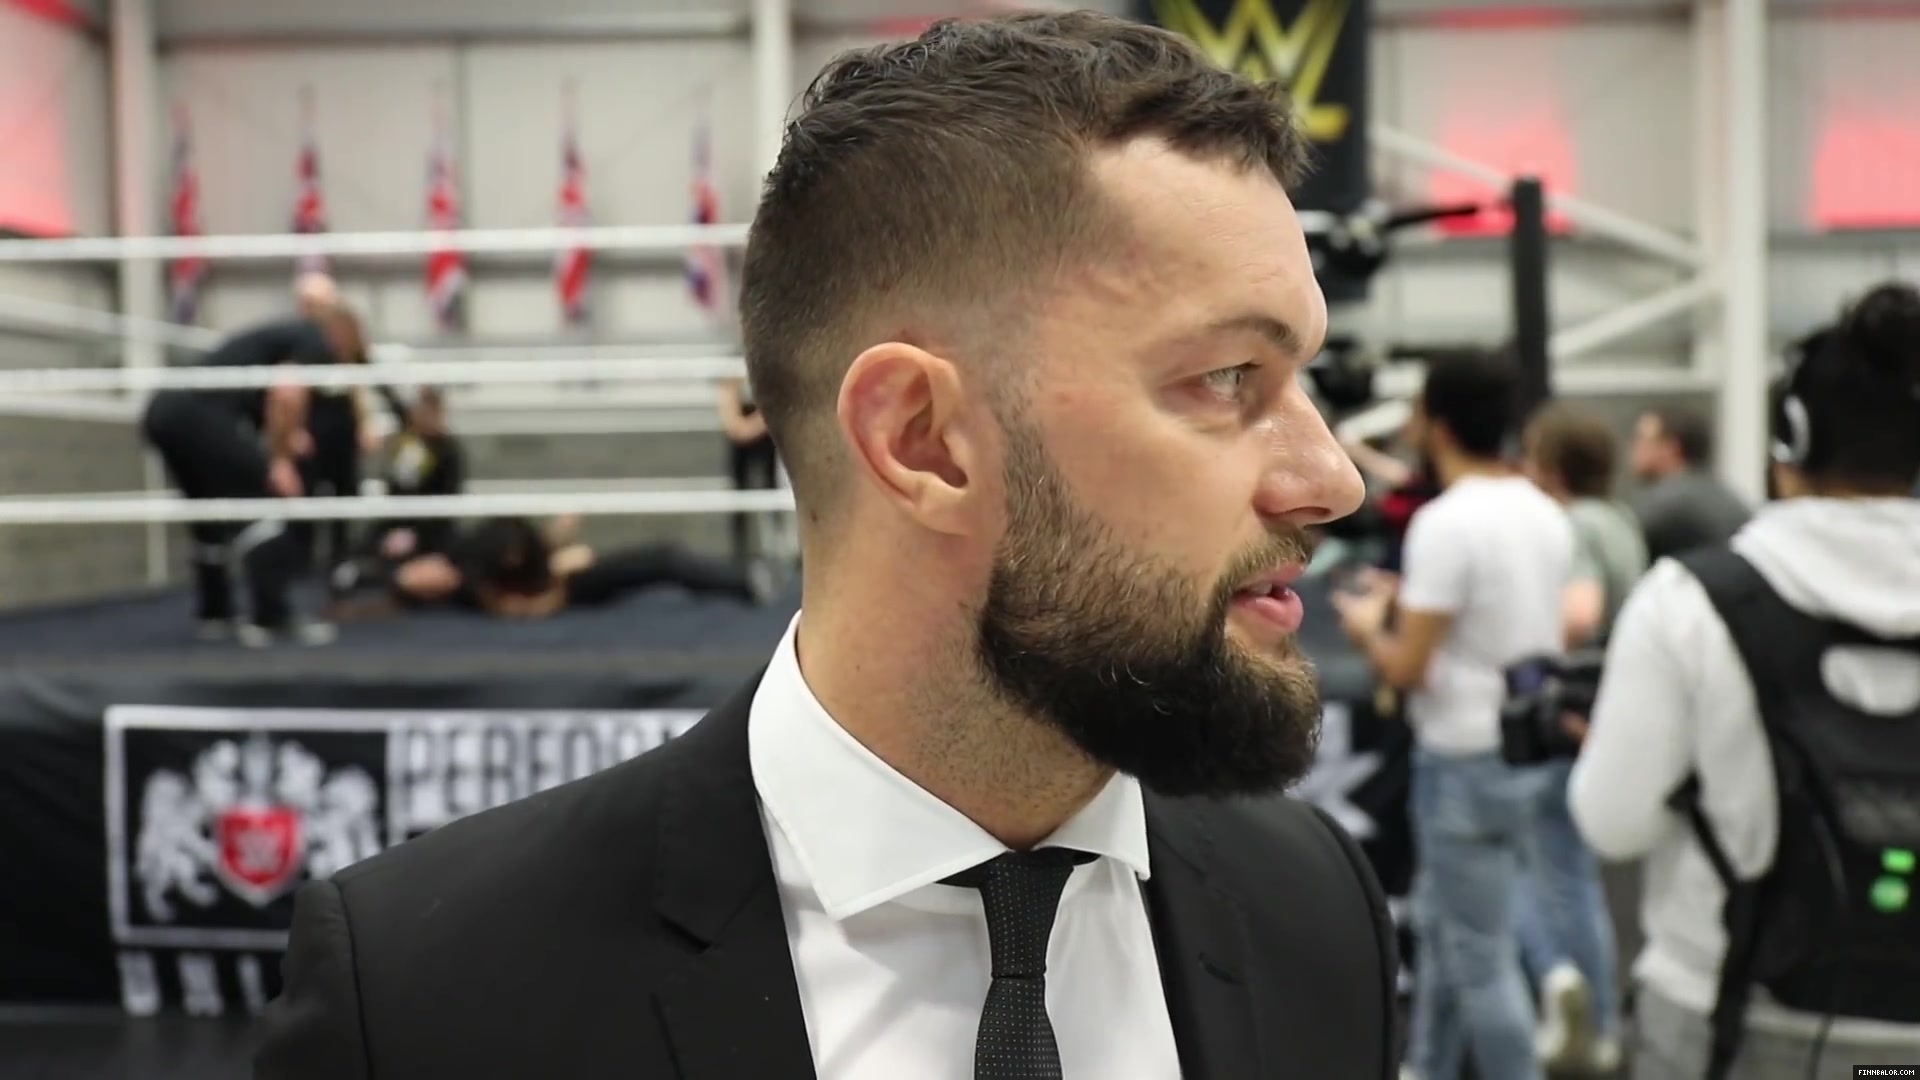 WWE_Superstar_FINN_BALOR_joins_MOUSTACHE_MOUNTAIN_at_the_opening_of_the_NXT_UK_PC_145.jpg